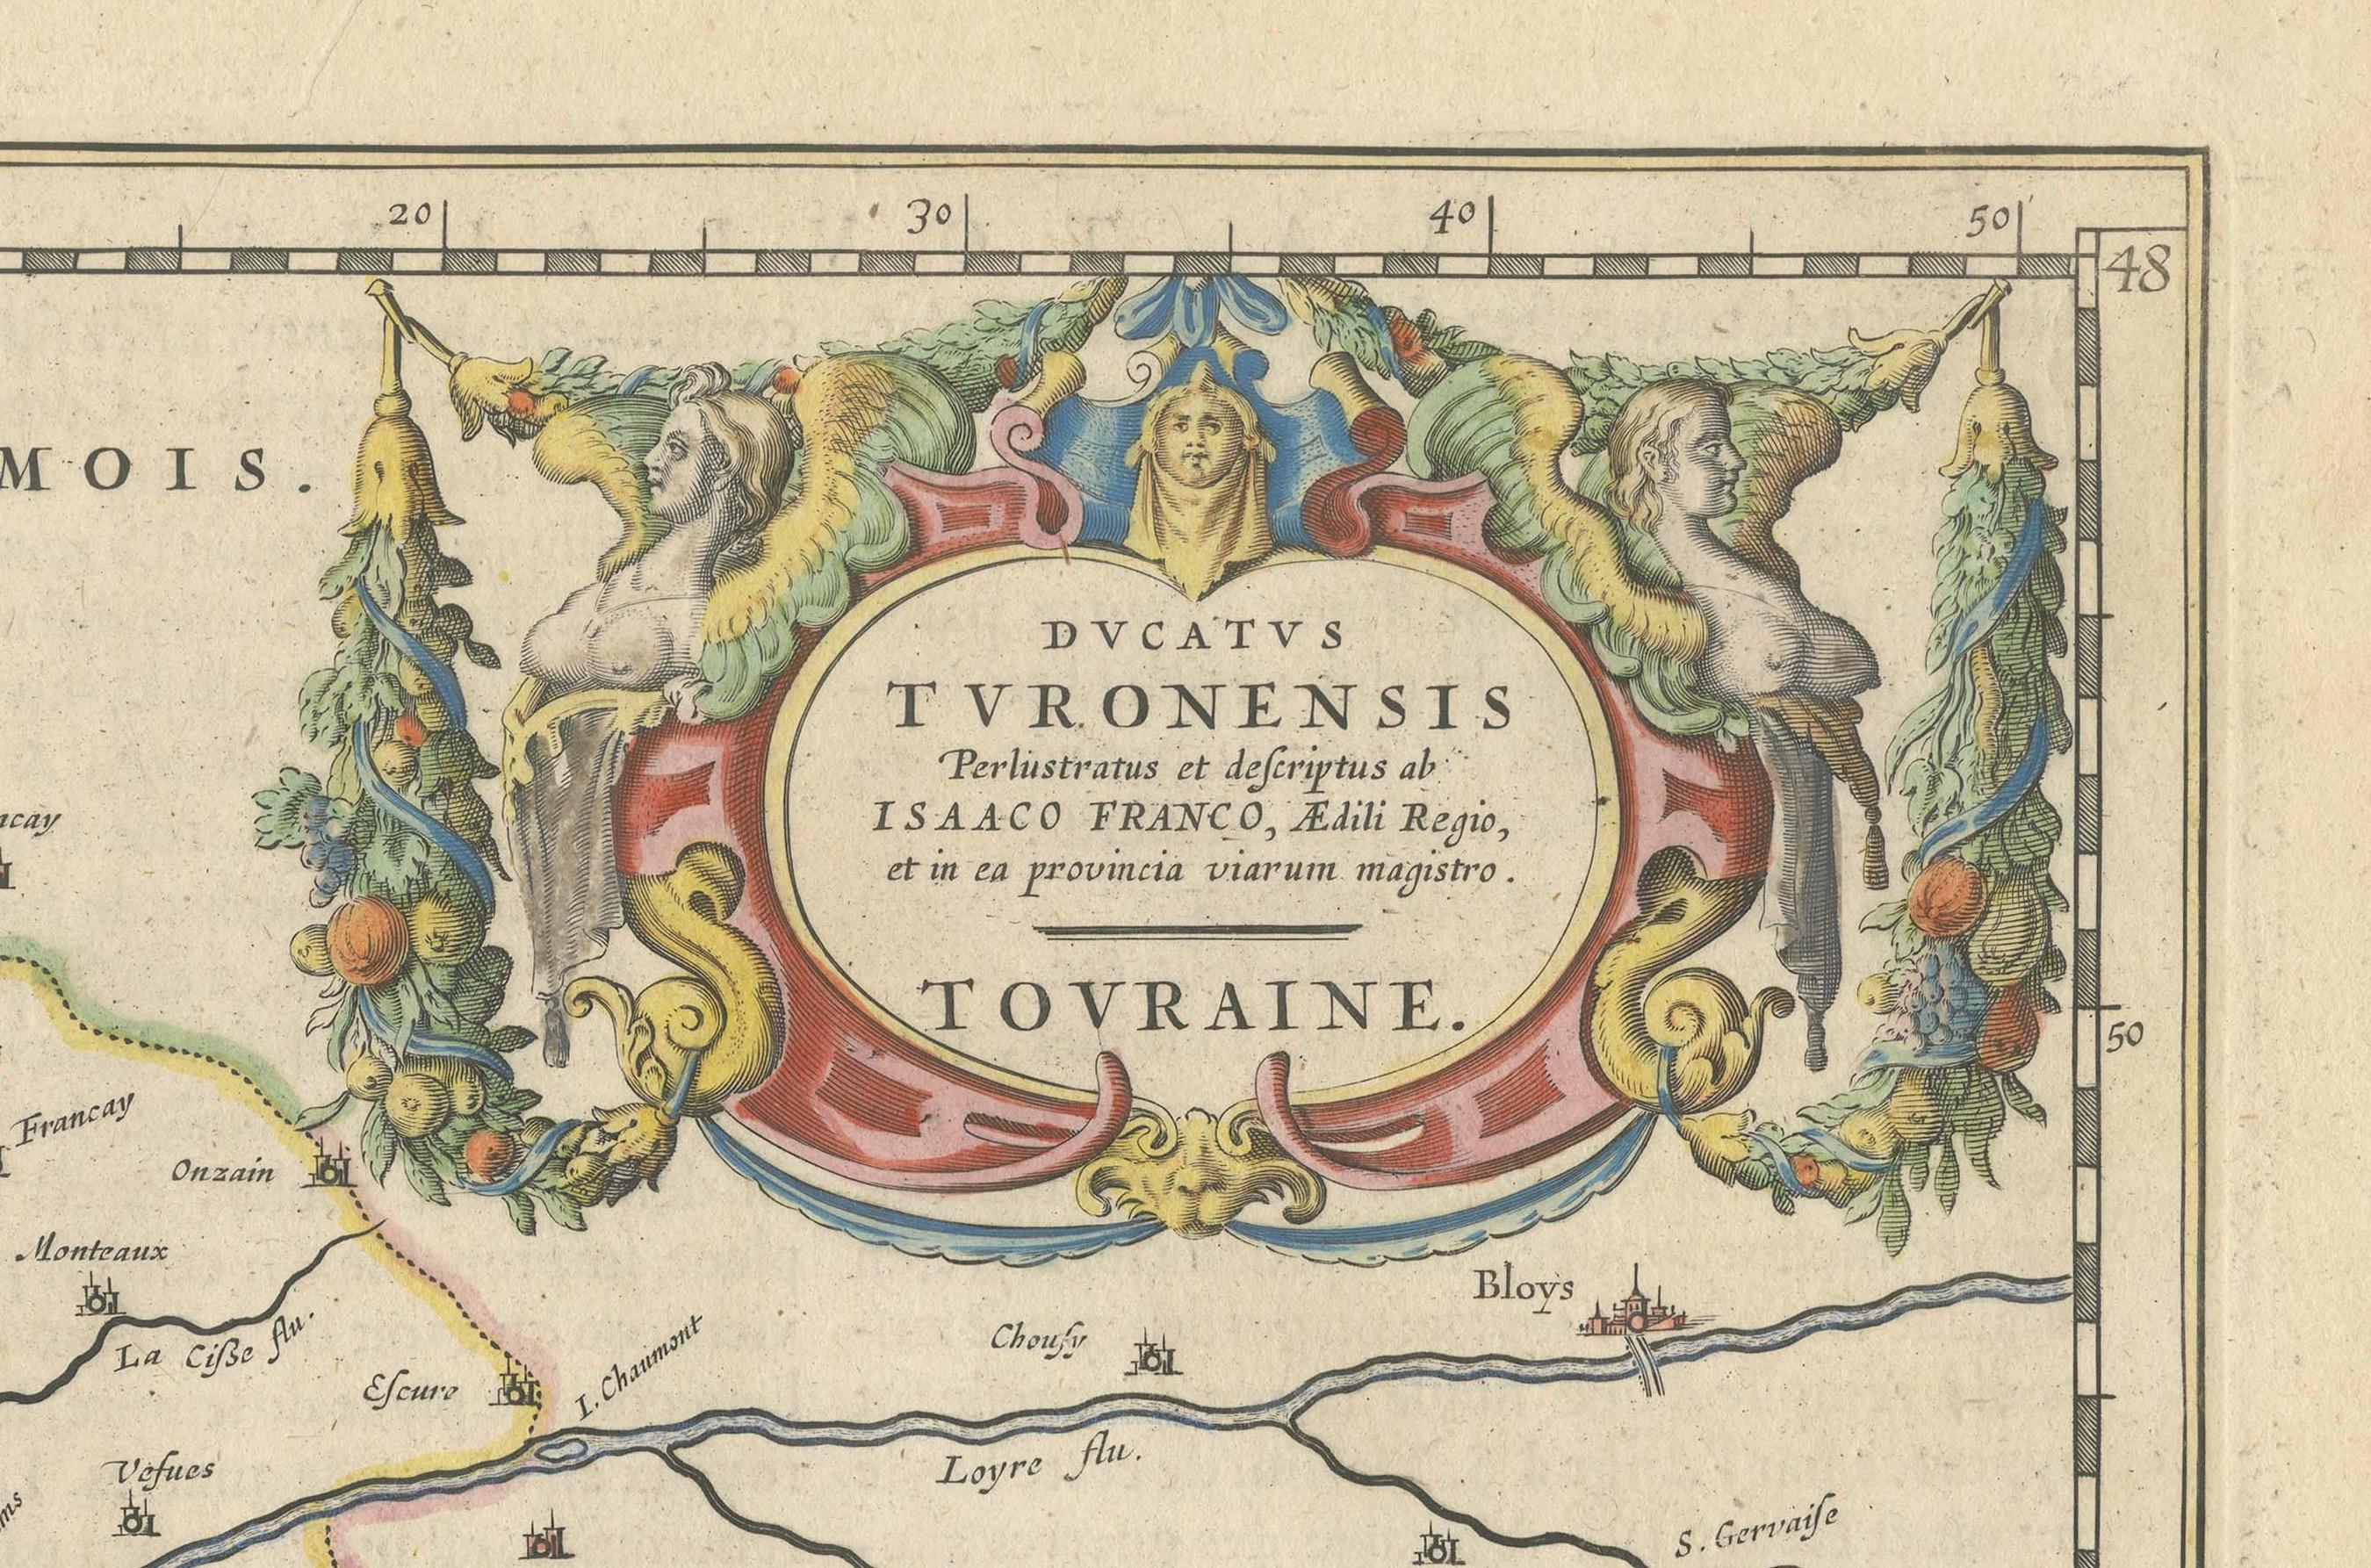 Paper Cartographic Elegance of Touraine: A 17th-Century Map Showing French Heritage For Sale